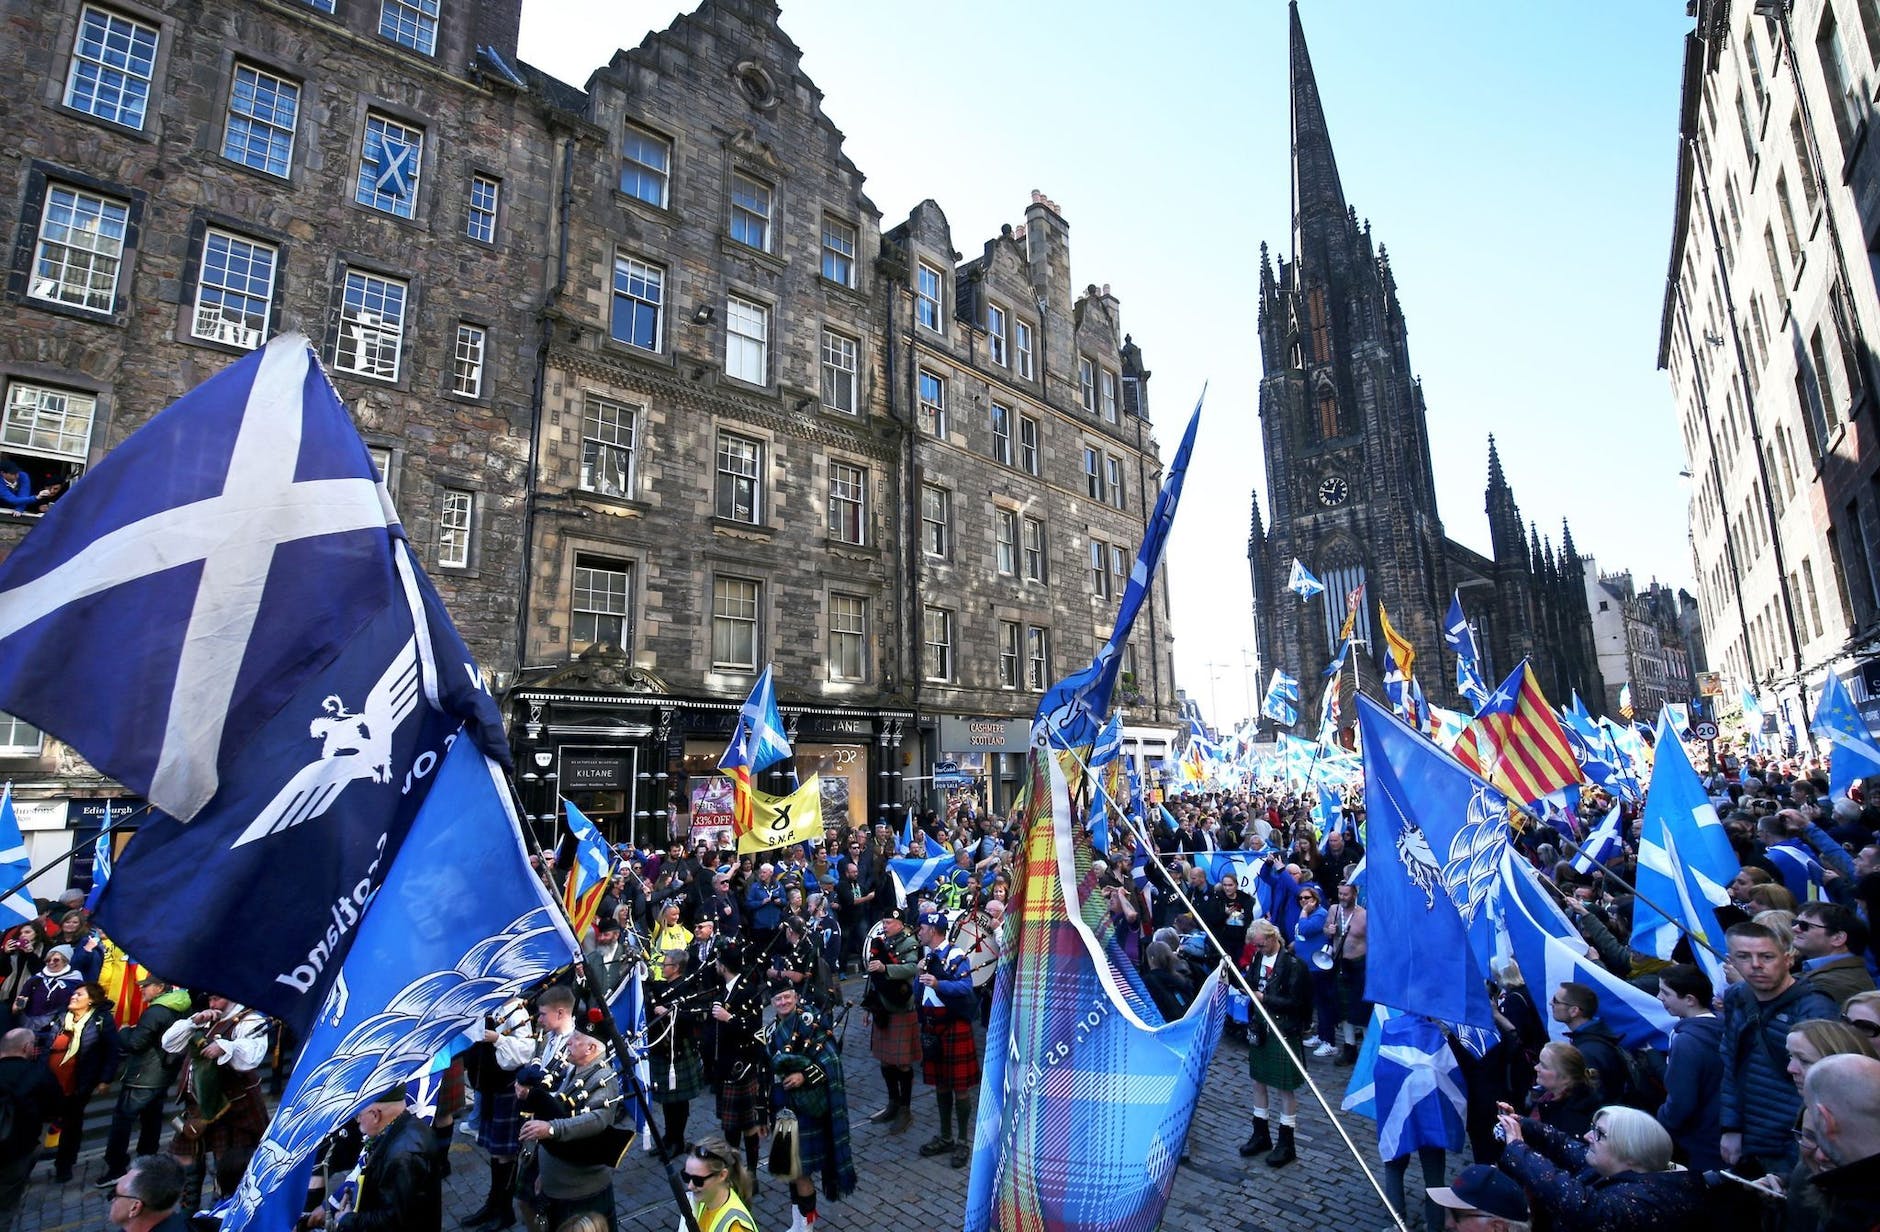 Archive - Supporters of Scottish independence attend a demonstration in Edinburgh.  